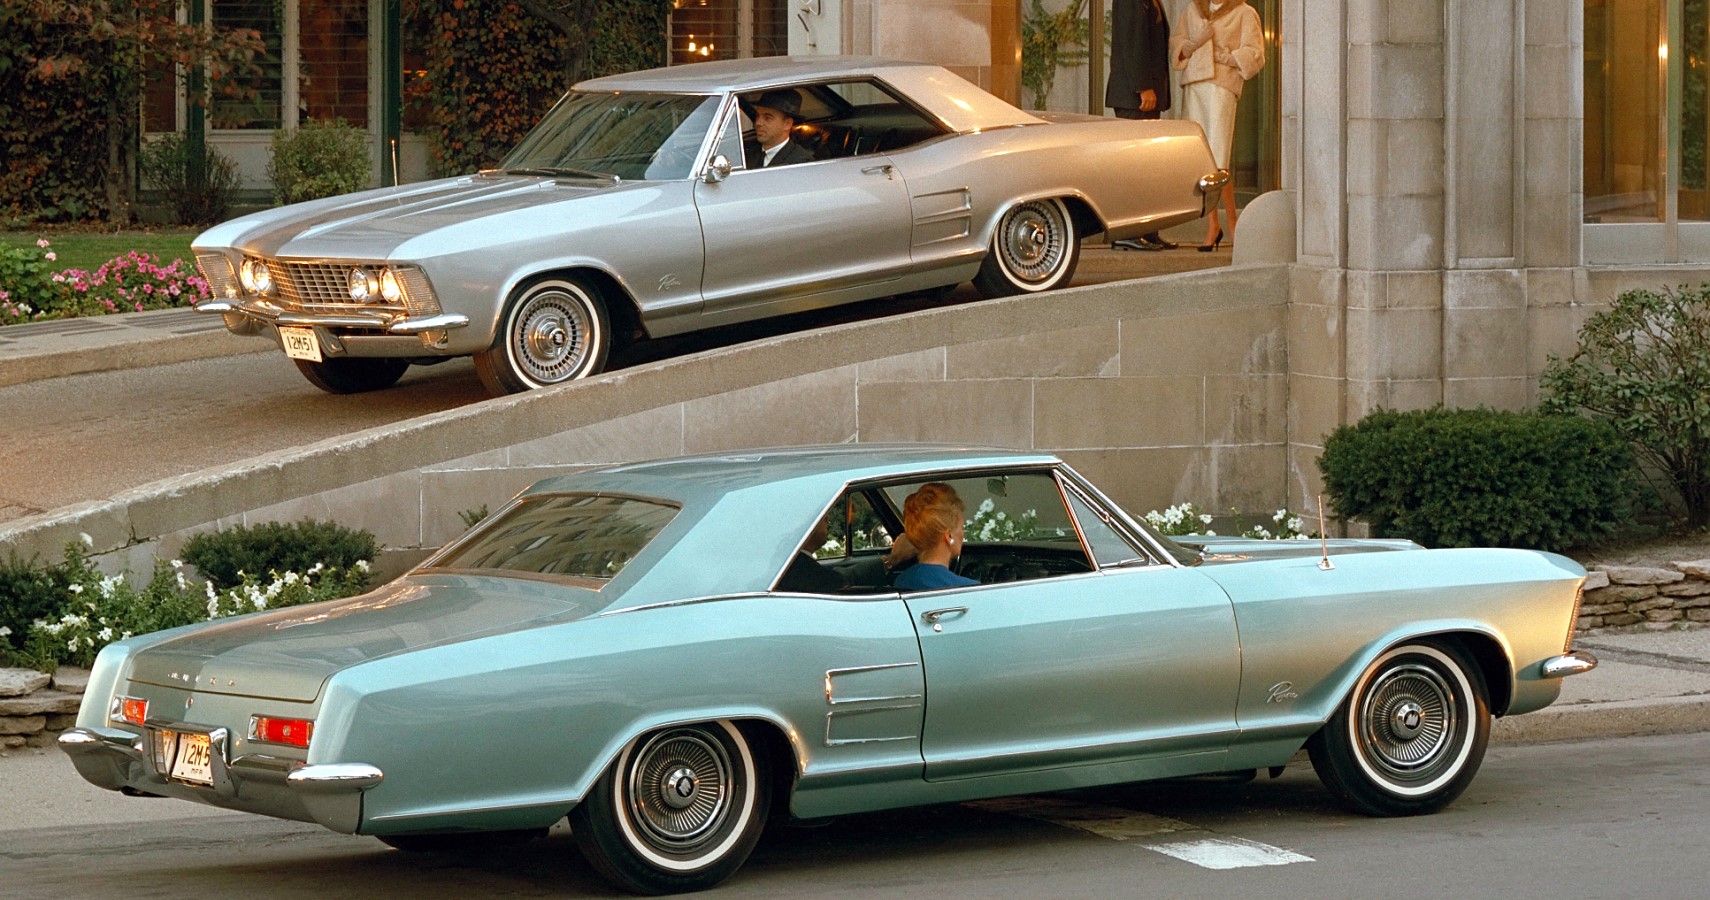 1963 Buick Riviera front and rear view